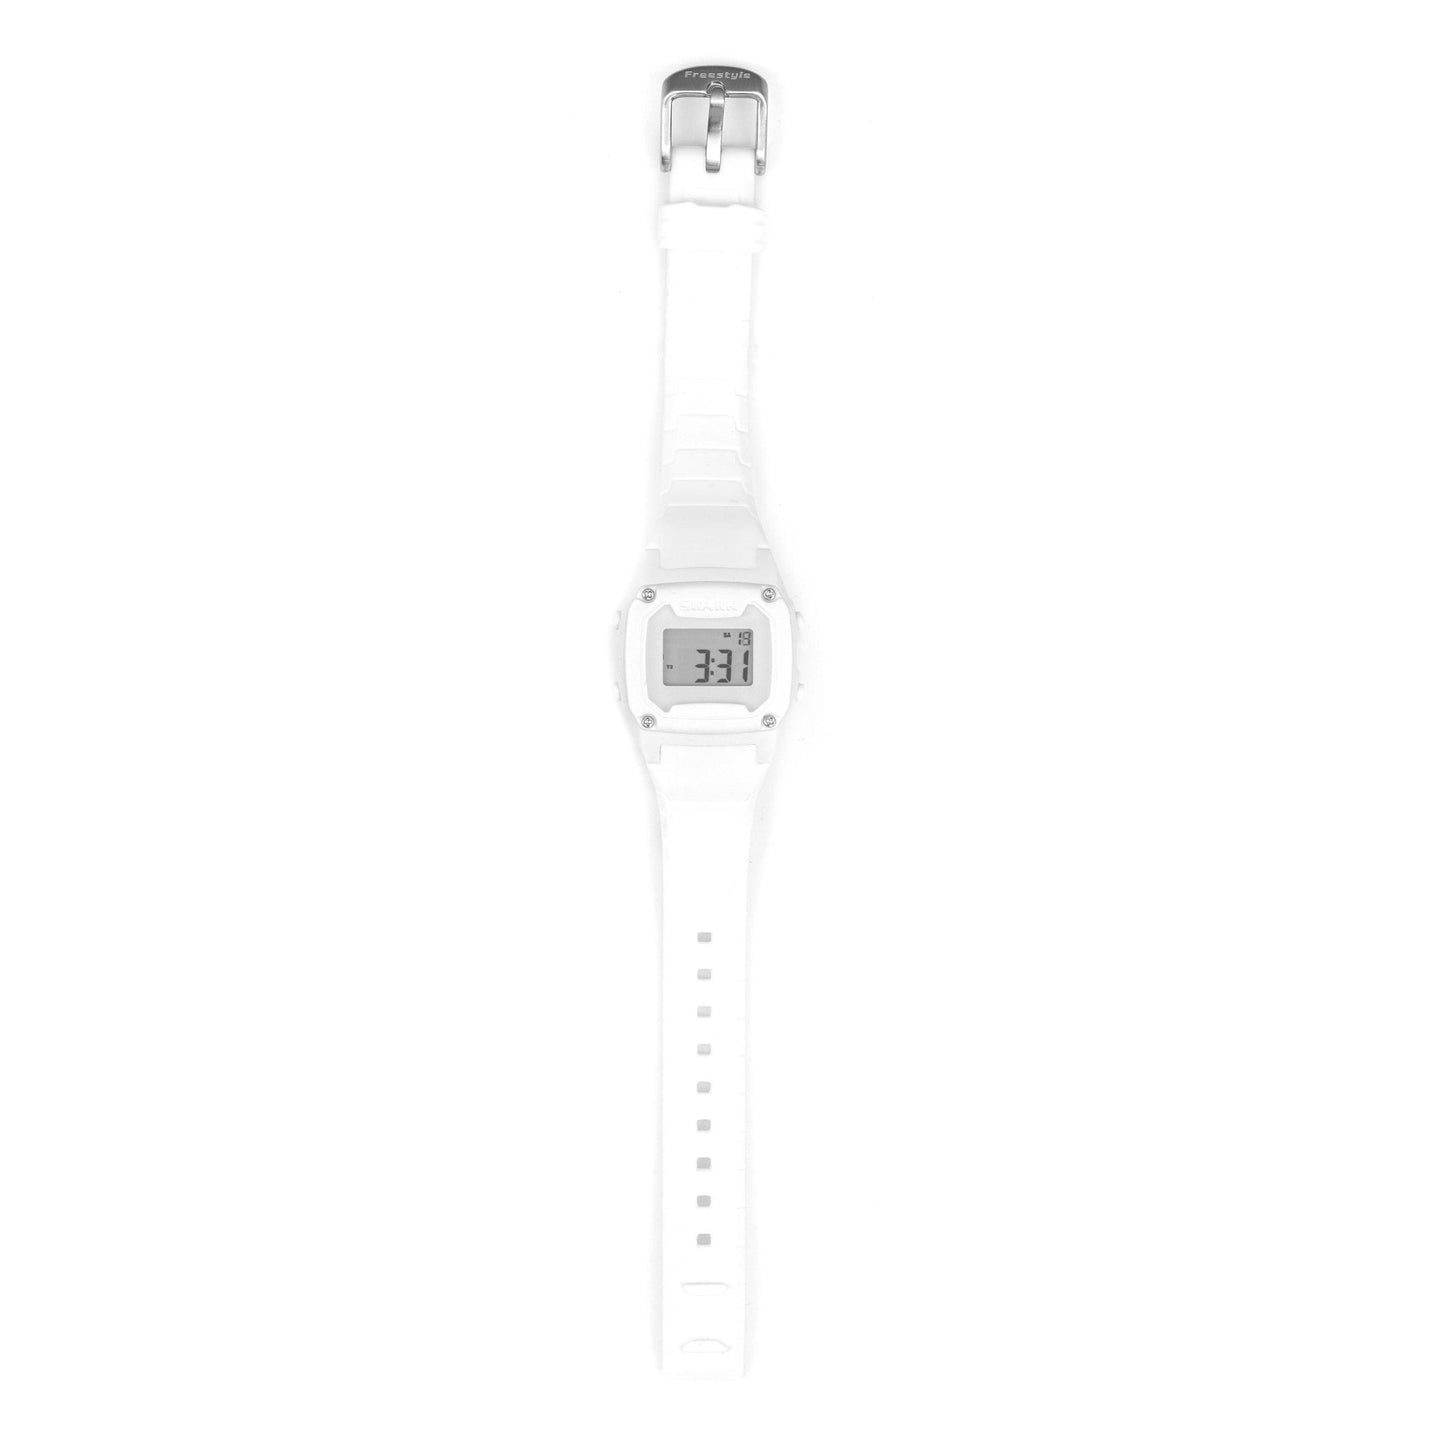 Freestyle Watches Shark Mini Watch - White Out